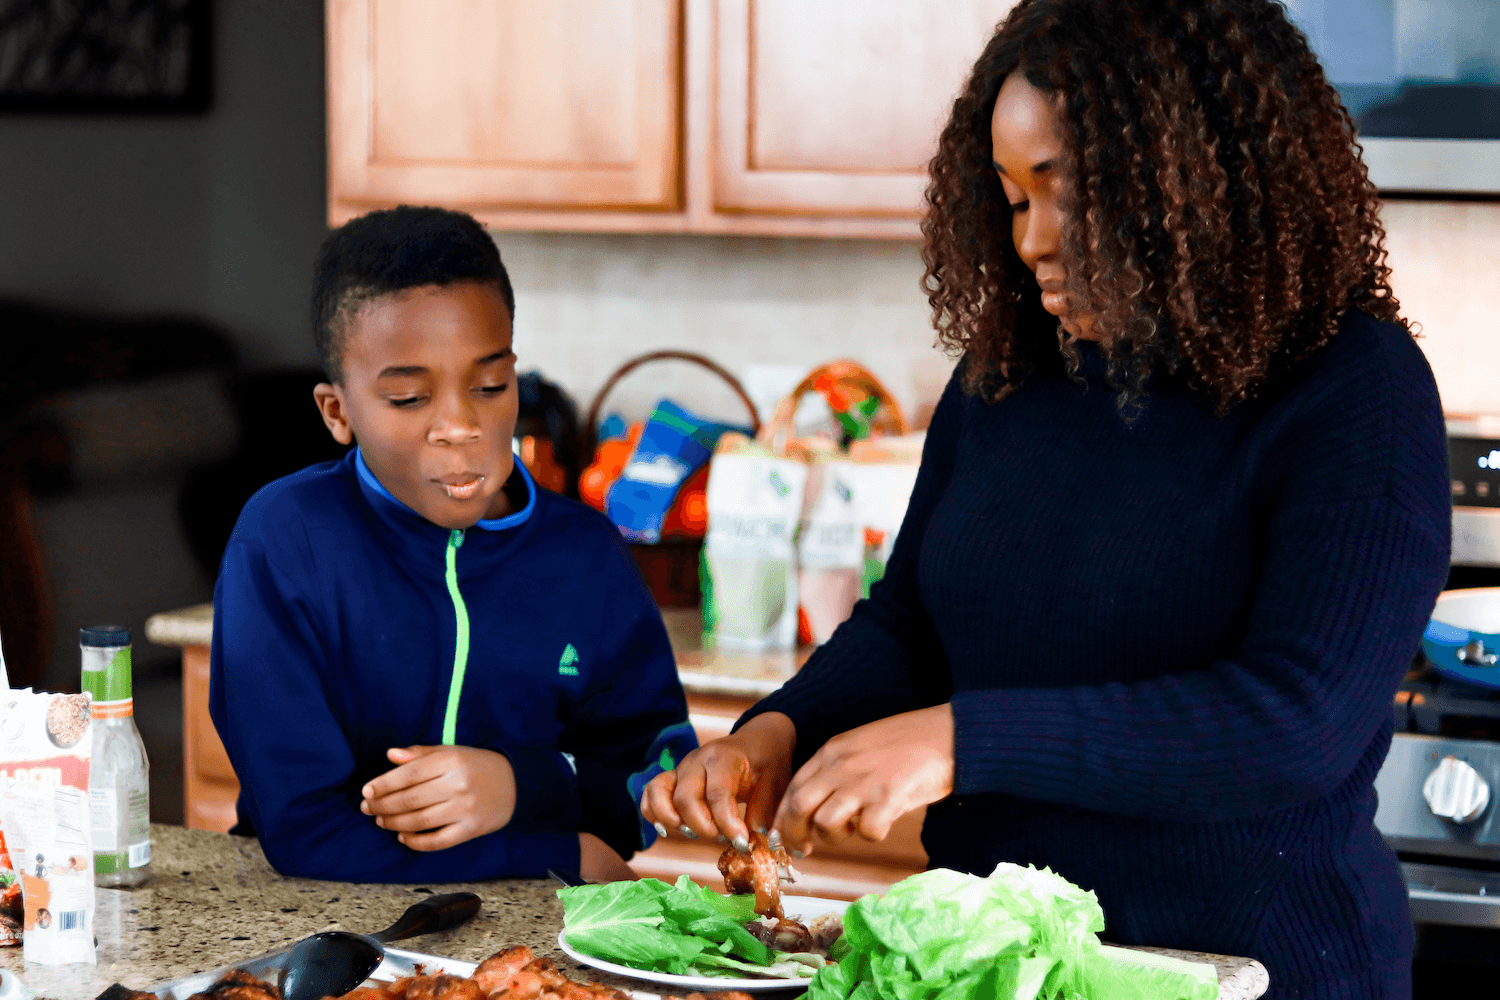 Toyin Kolawole and her son in the kitchen. October 2020